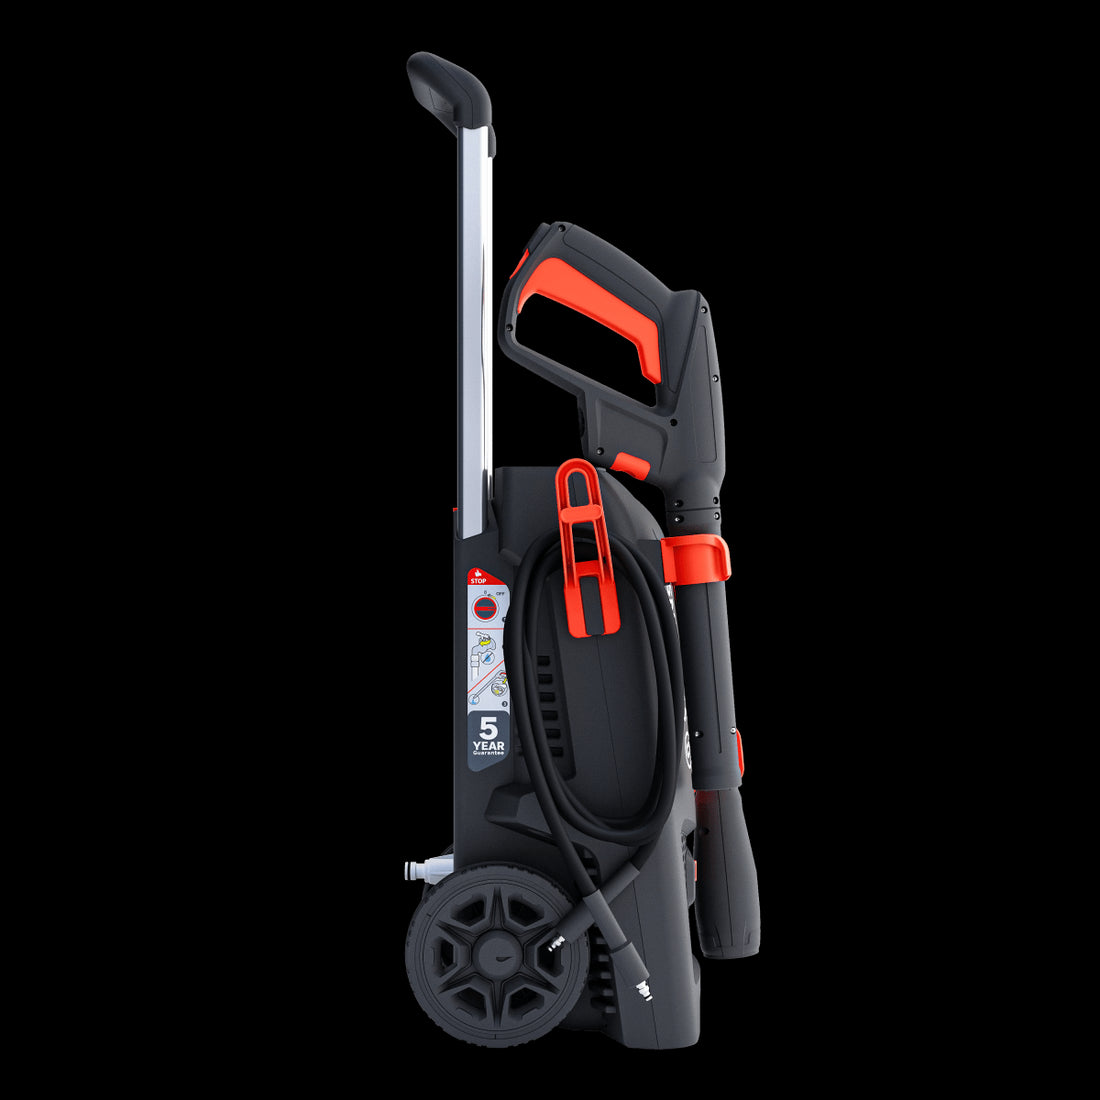 STERWINS ST3 HIGH-PRESSURE WASHER MAX. PRESSURE 150 BAR WITH 5-IN-1 LARGE NOZZLE GUN